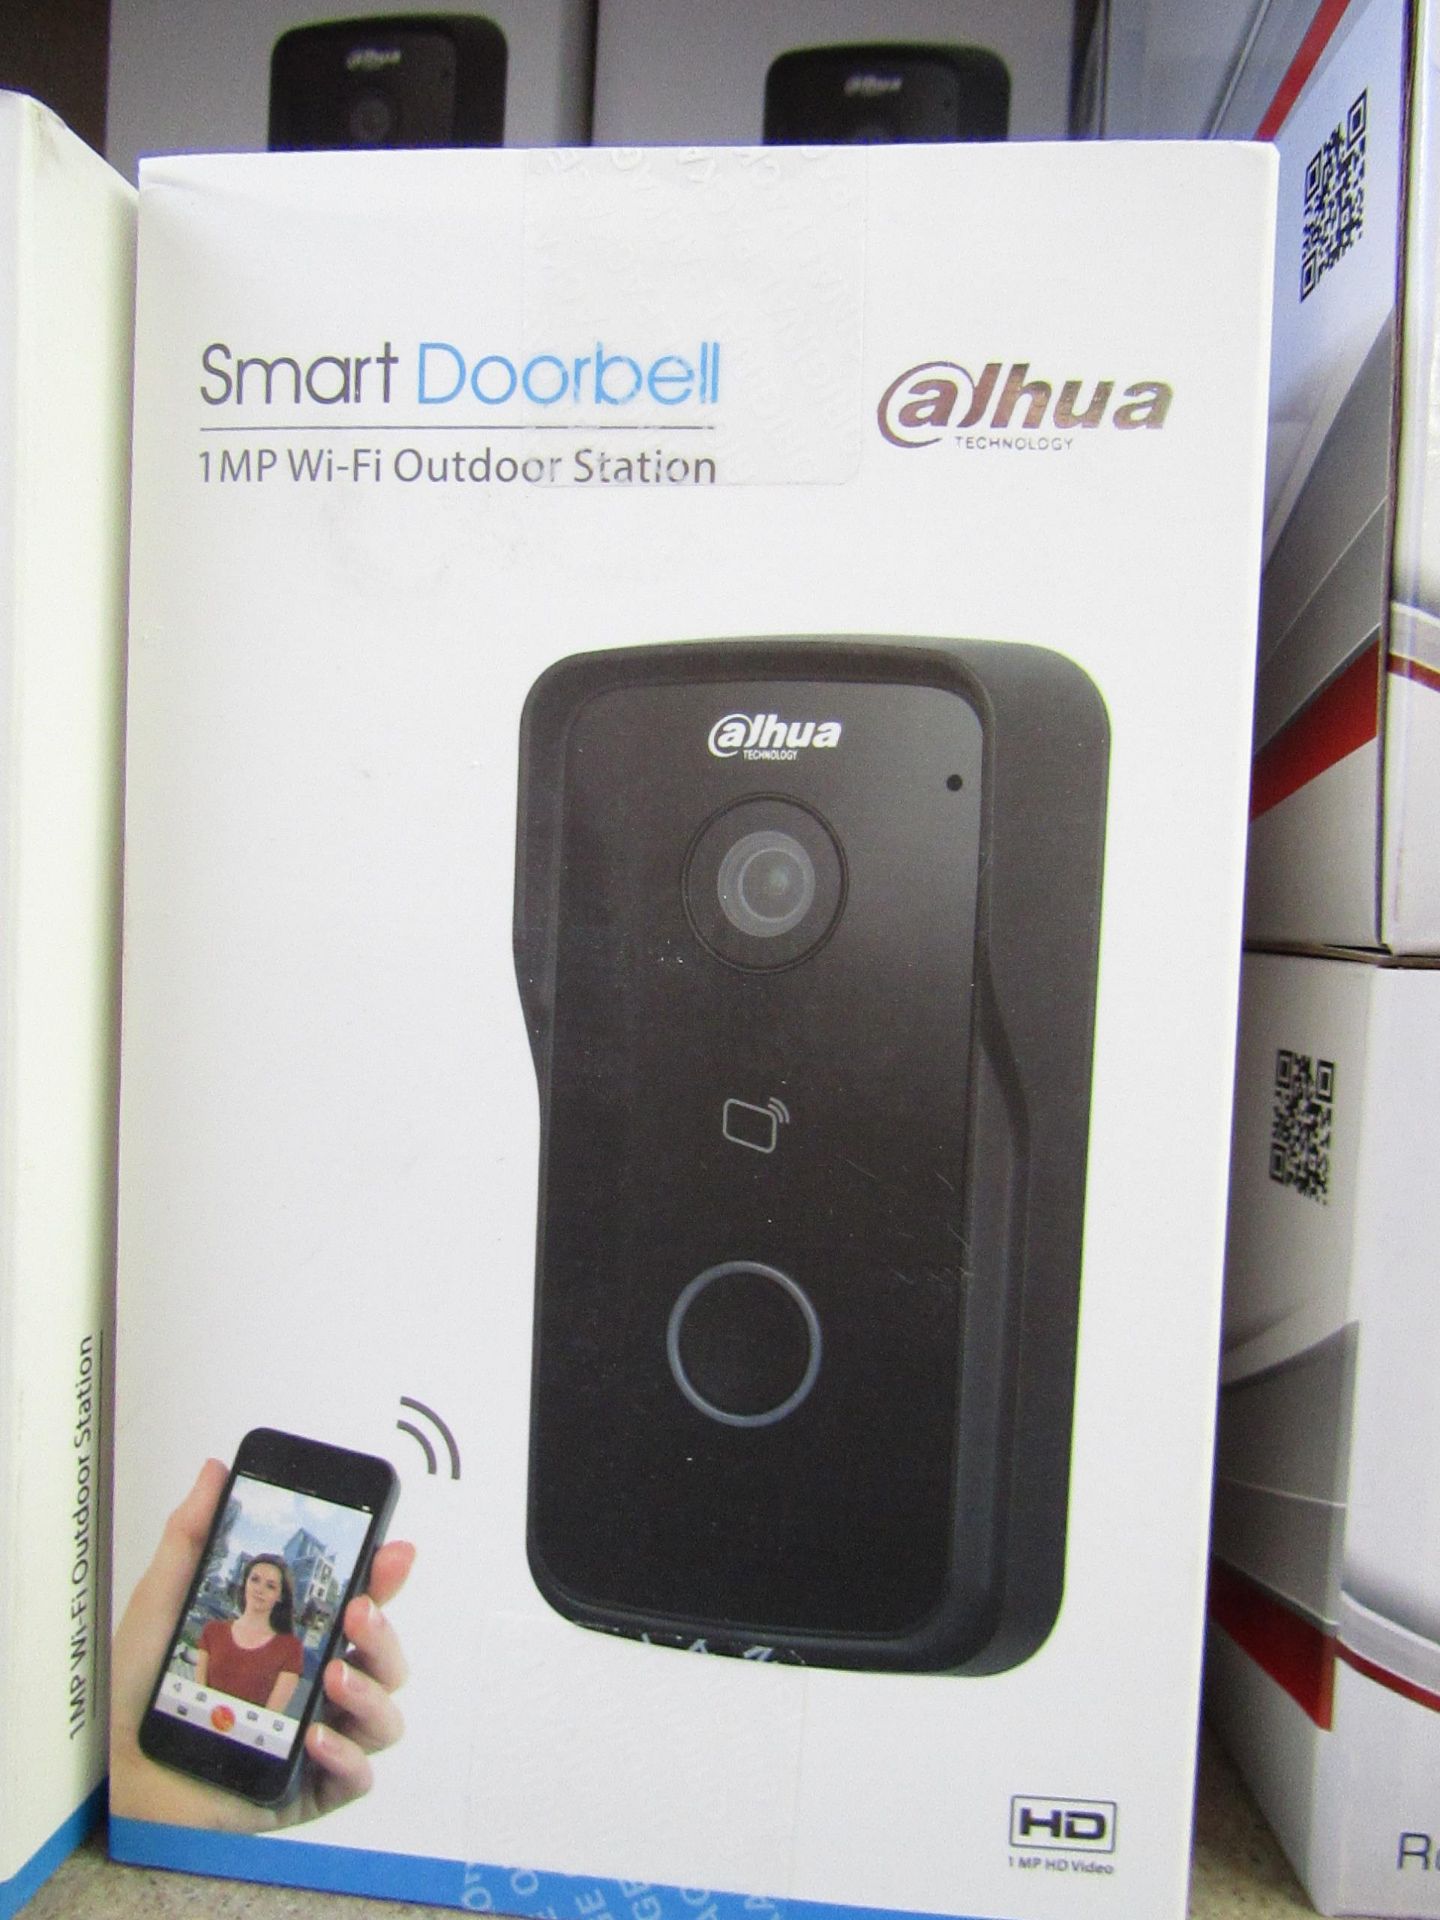 Dahua smart 1MP WiFi outdoor station doorbell Features: Can be set up wireless Audio enable to speak